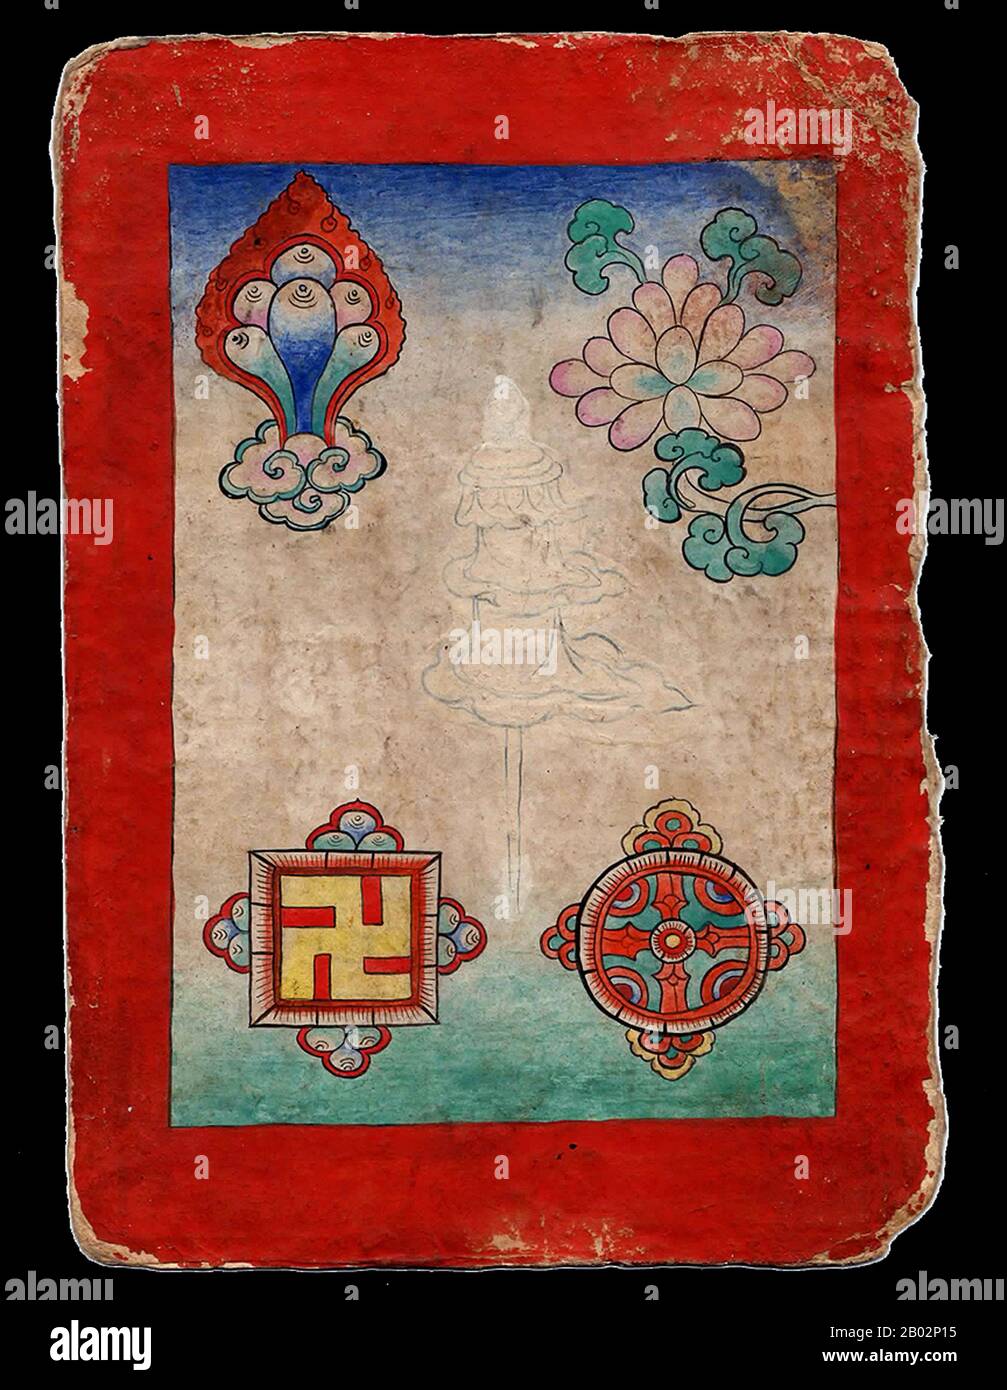 Displaying various auspicious symbols and including a Svastika or Swastika which means 'auspicious' in the Sanskrit language. It is called yungdrung in the ancient Zhangzhung language of Western Tibet and means 'everlasting'.  The left turning Svastika is the principal religious symbol of the Yungdrung Bön tradition. Stock Photo